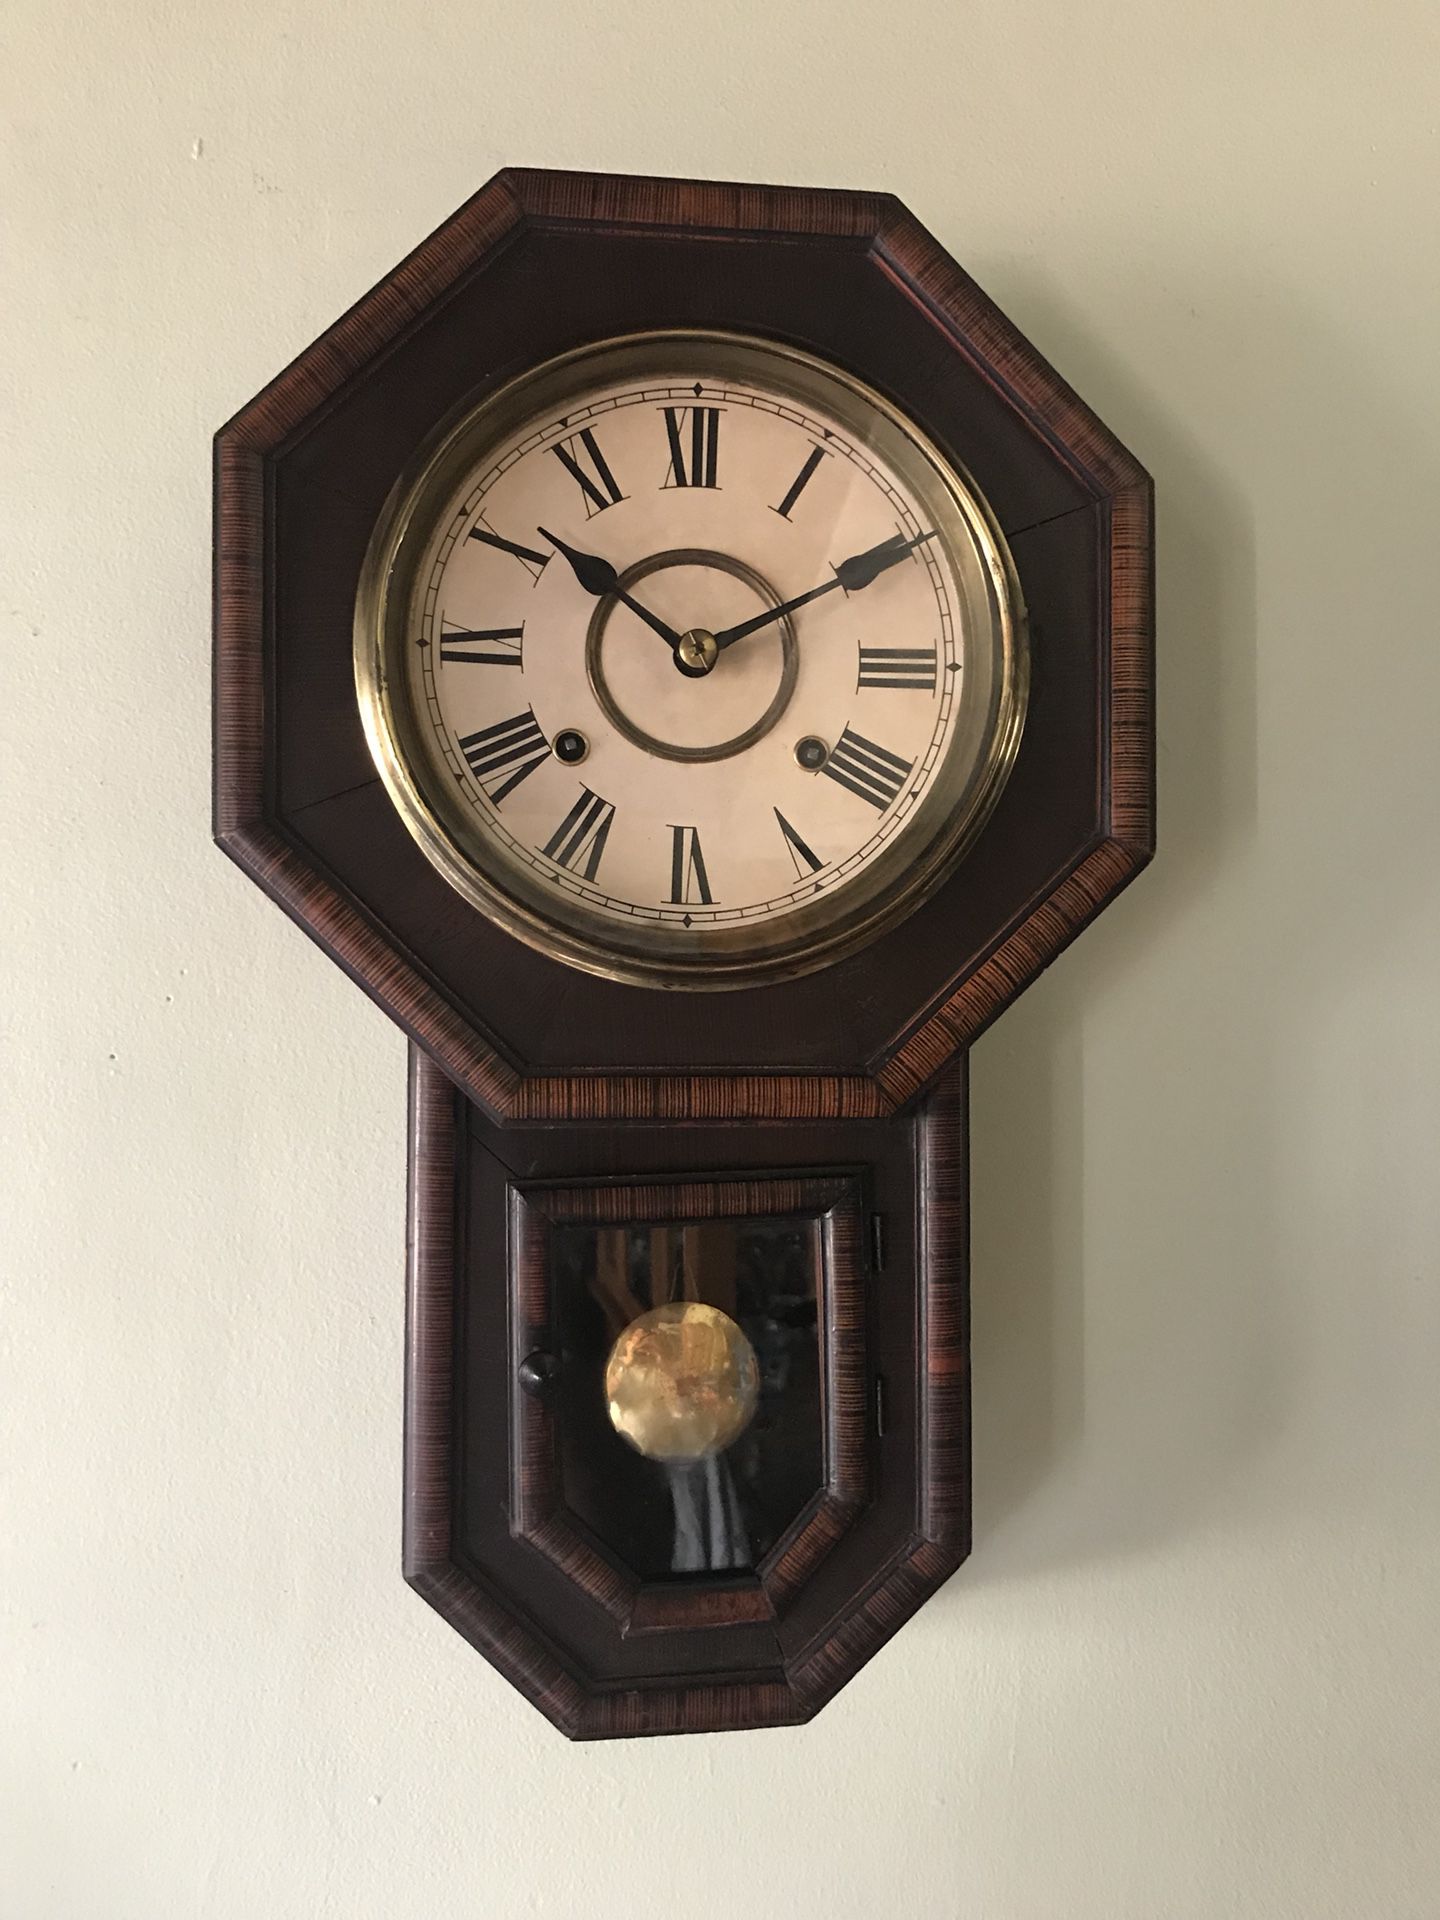 Antique Japanese “Schoolhouse Clock” from The Nagoya Japan Clock Co.